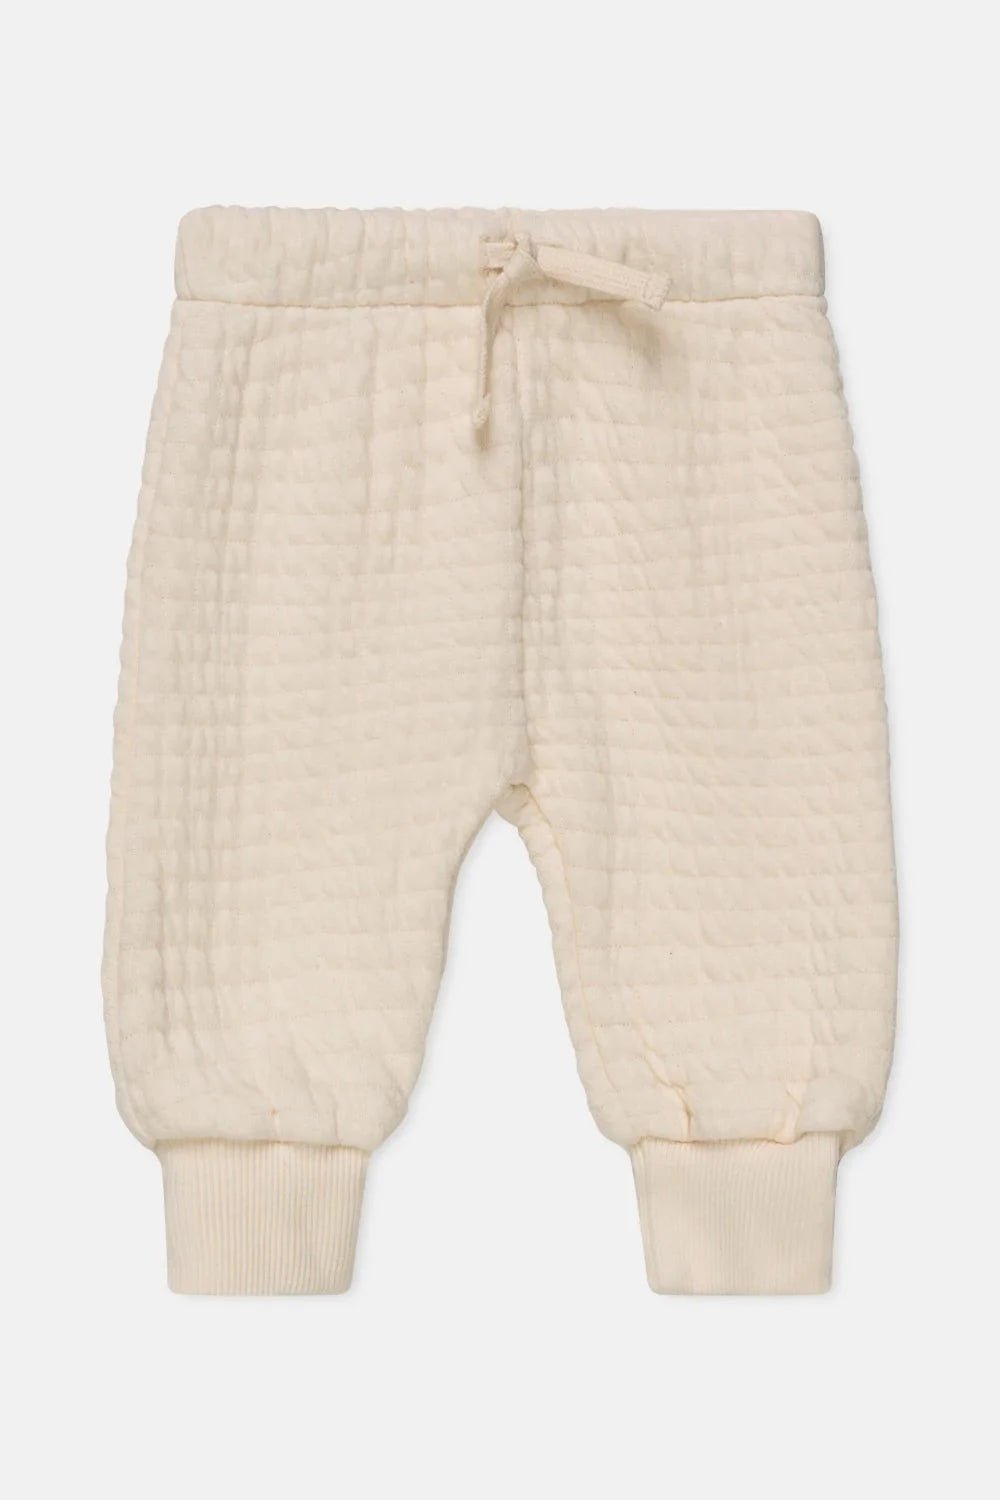 Padded Baby Pants | Ivory - TAYLOR + MAXMy Little Cozmo